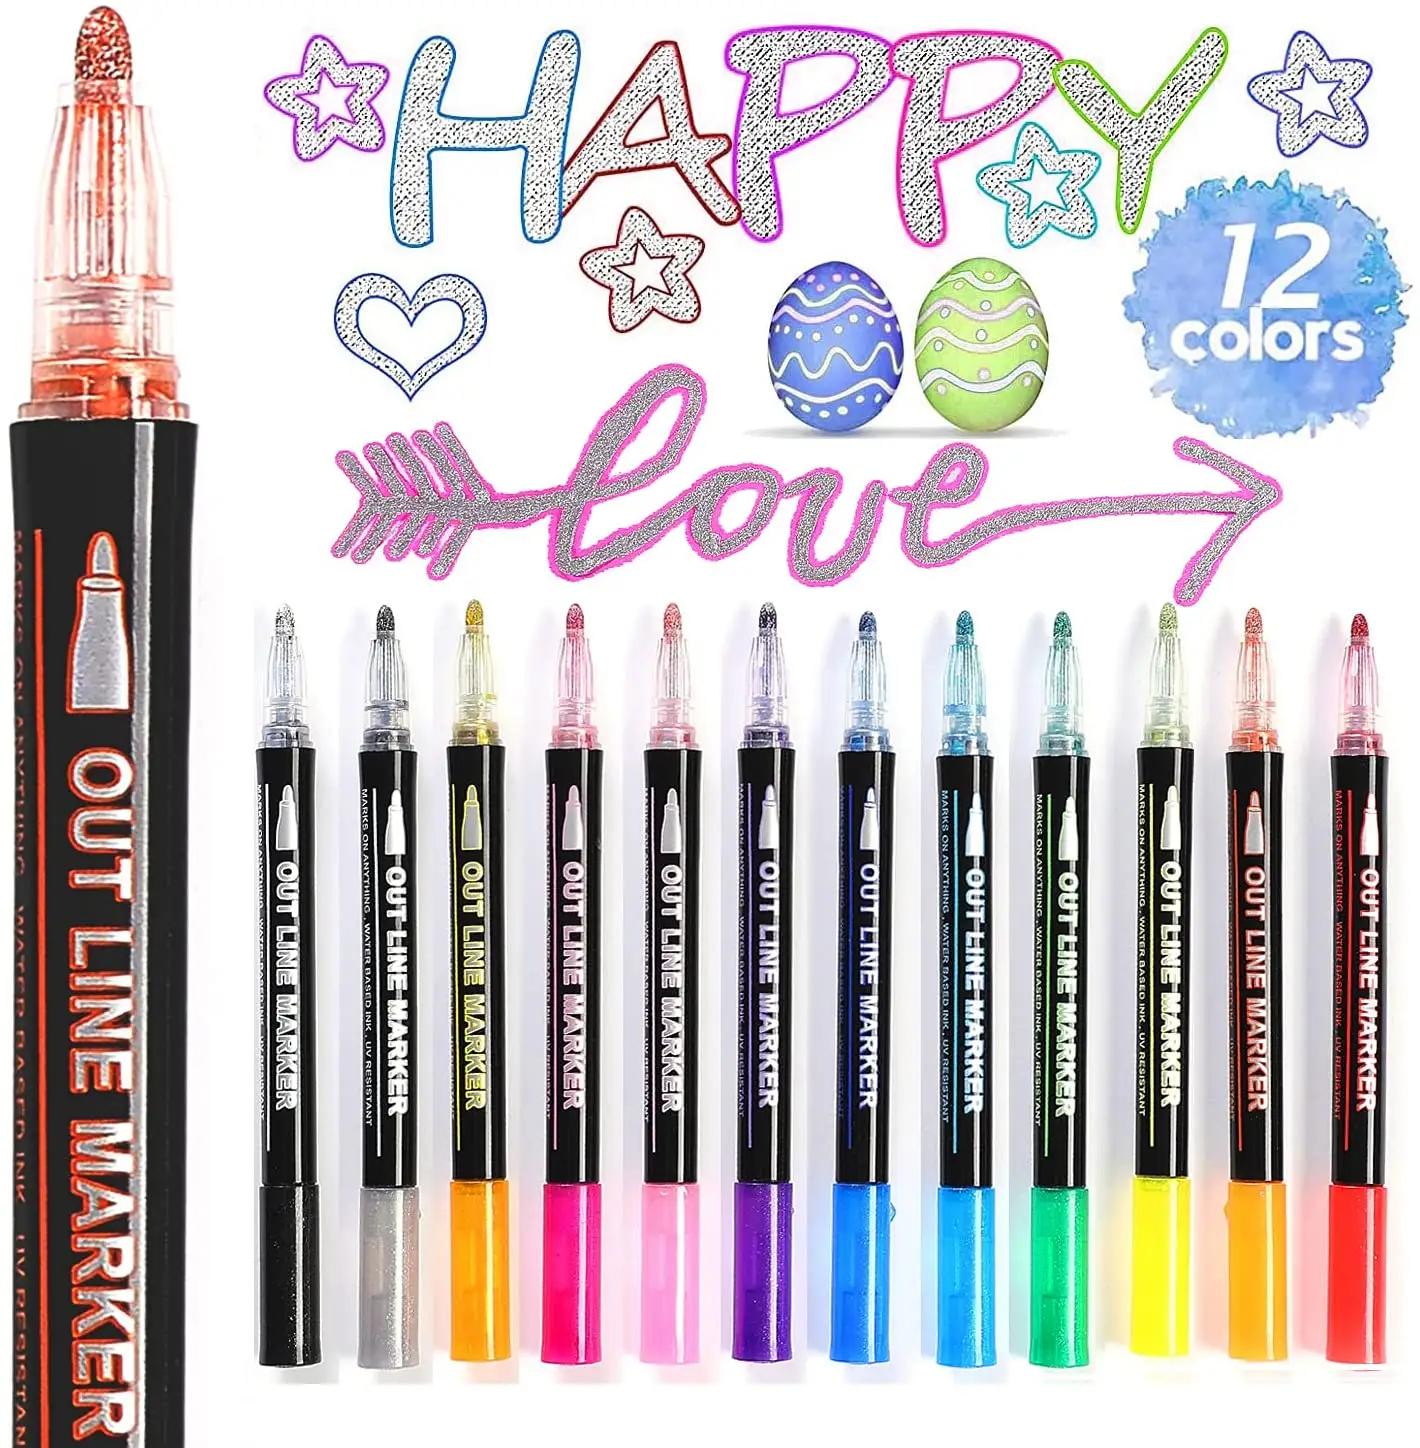 Gift Card Pens 12 Colors double outline pen Set Hand Drawing For Gift Glass Ceramic Rock Metal Art Marker